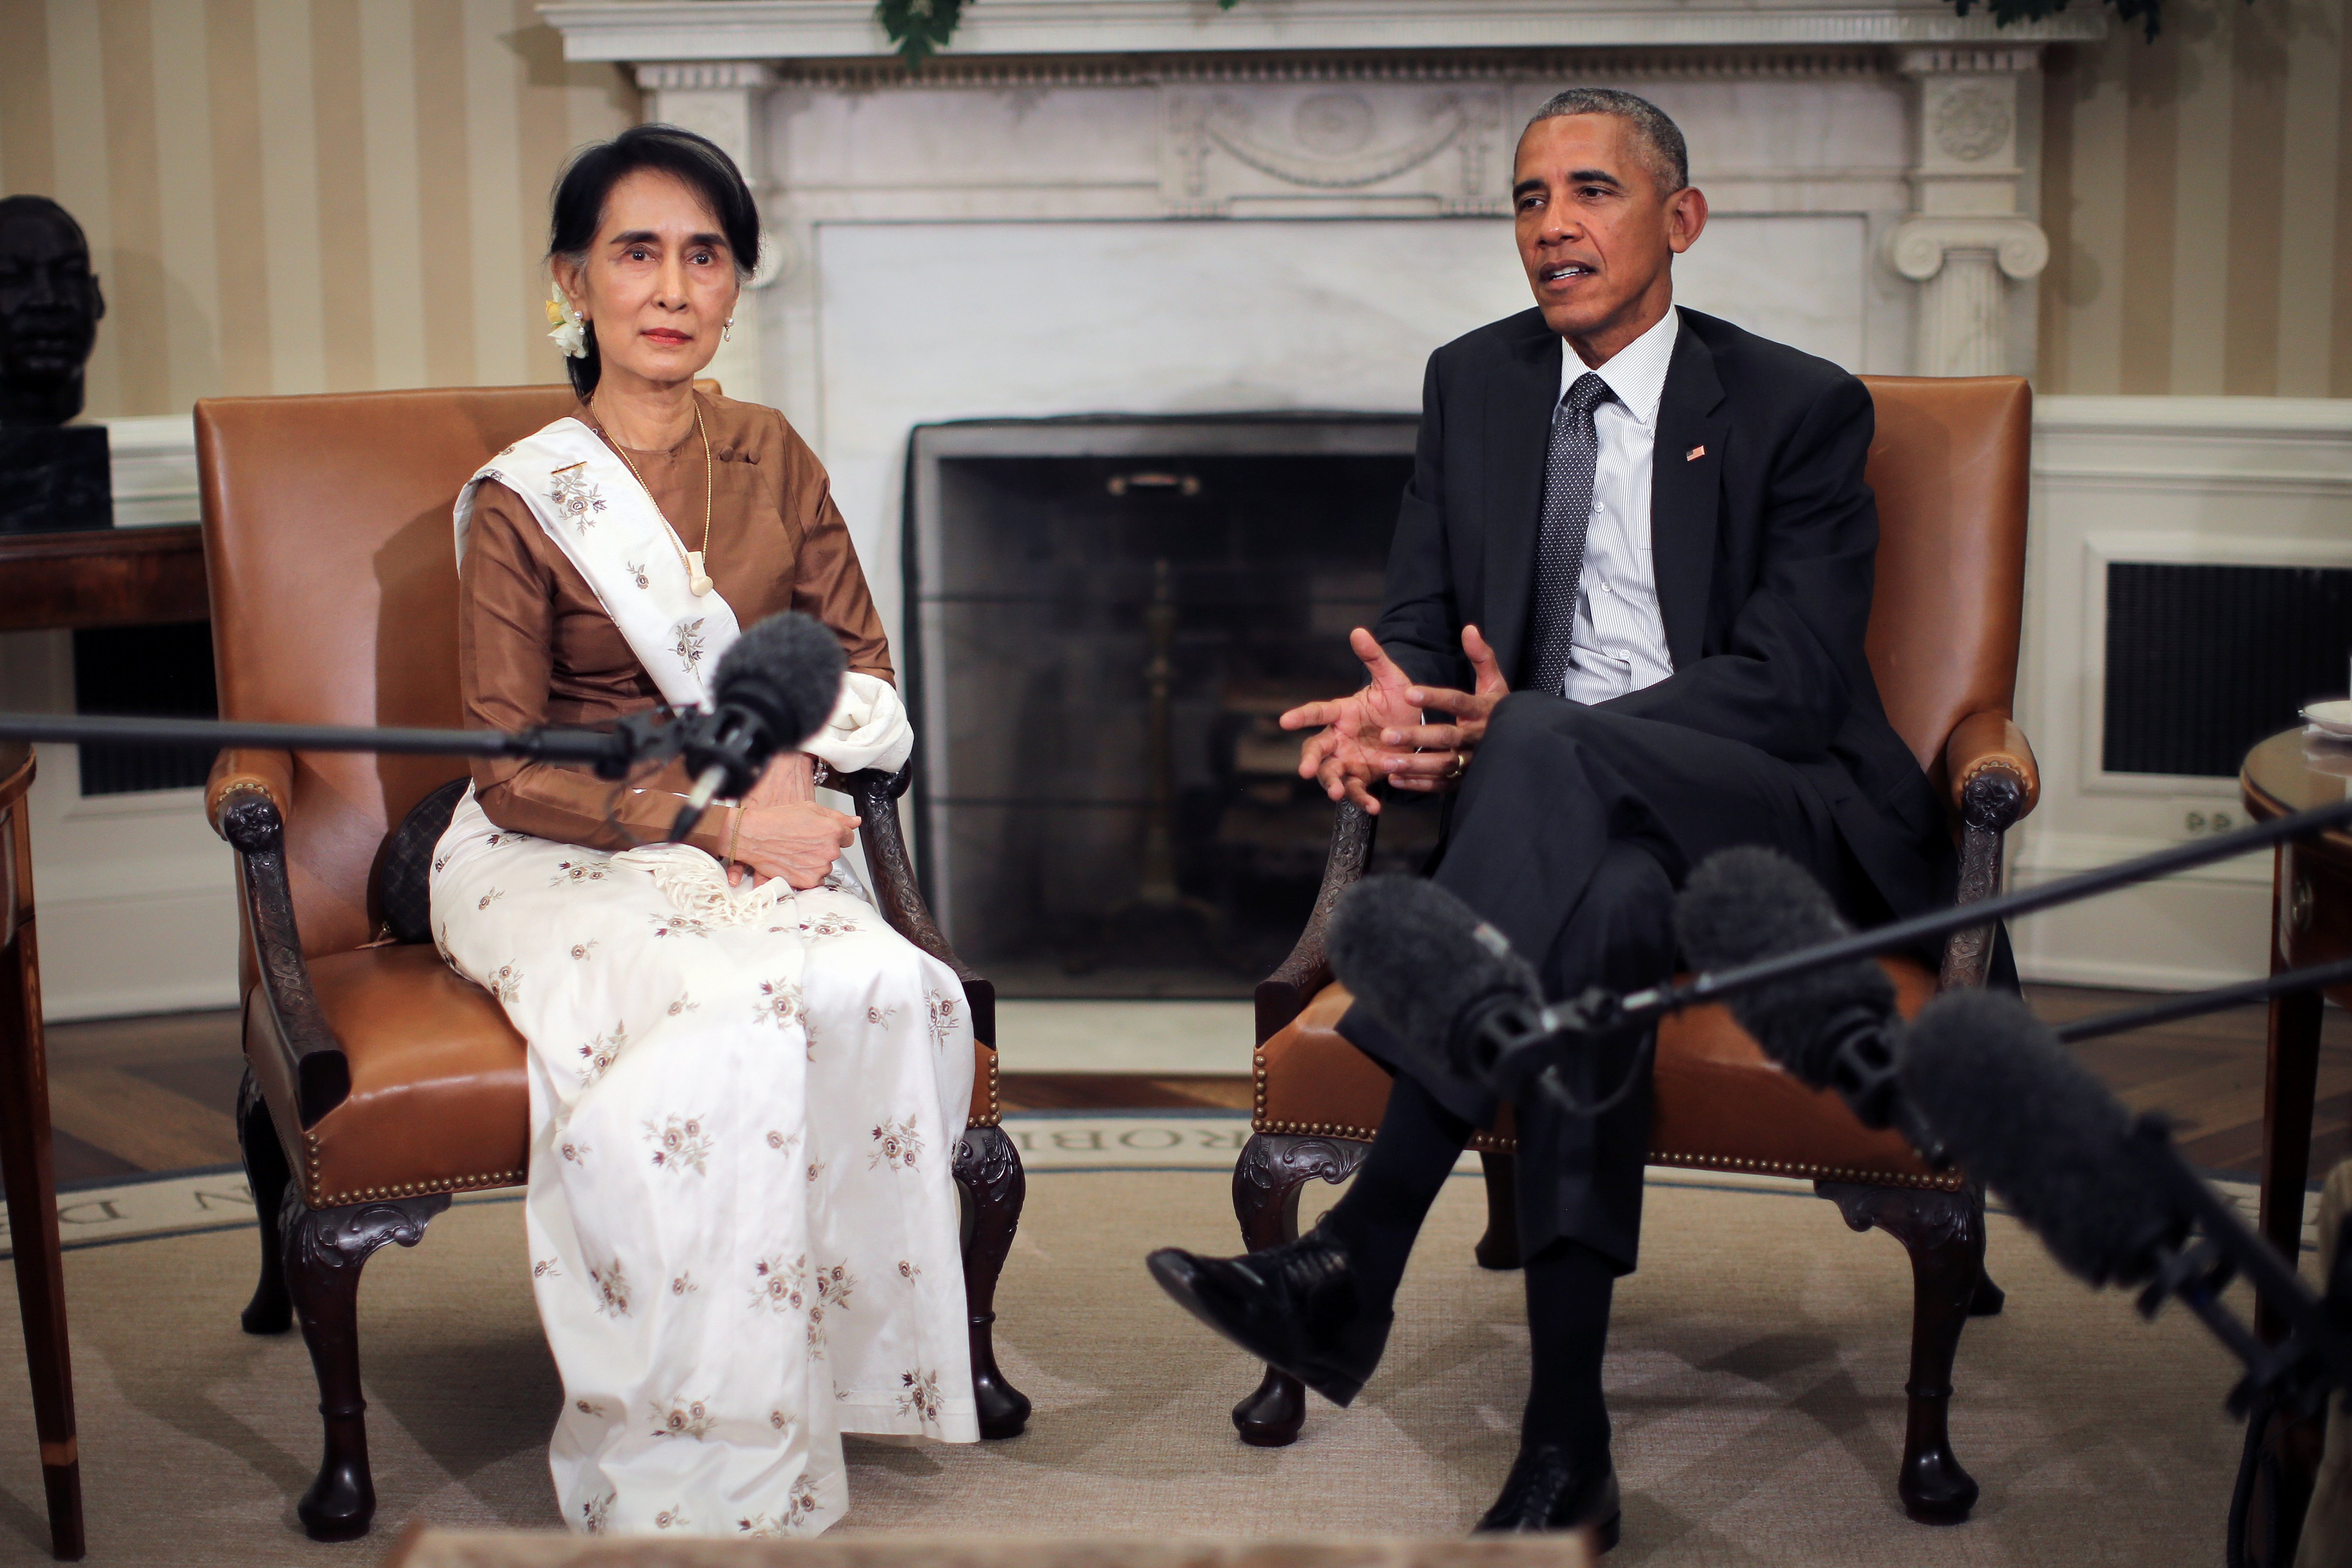 President Obama meets with Burma's State Counsellor Aung San Suu Kyi at the Oval Office of the White House in Washington, Sept. 14, 2016. (Carlos Barria—Reuters)